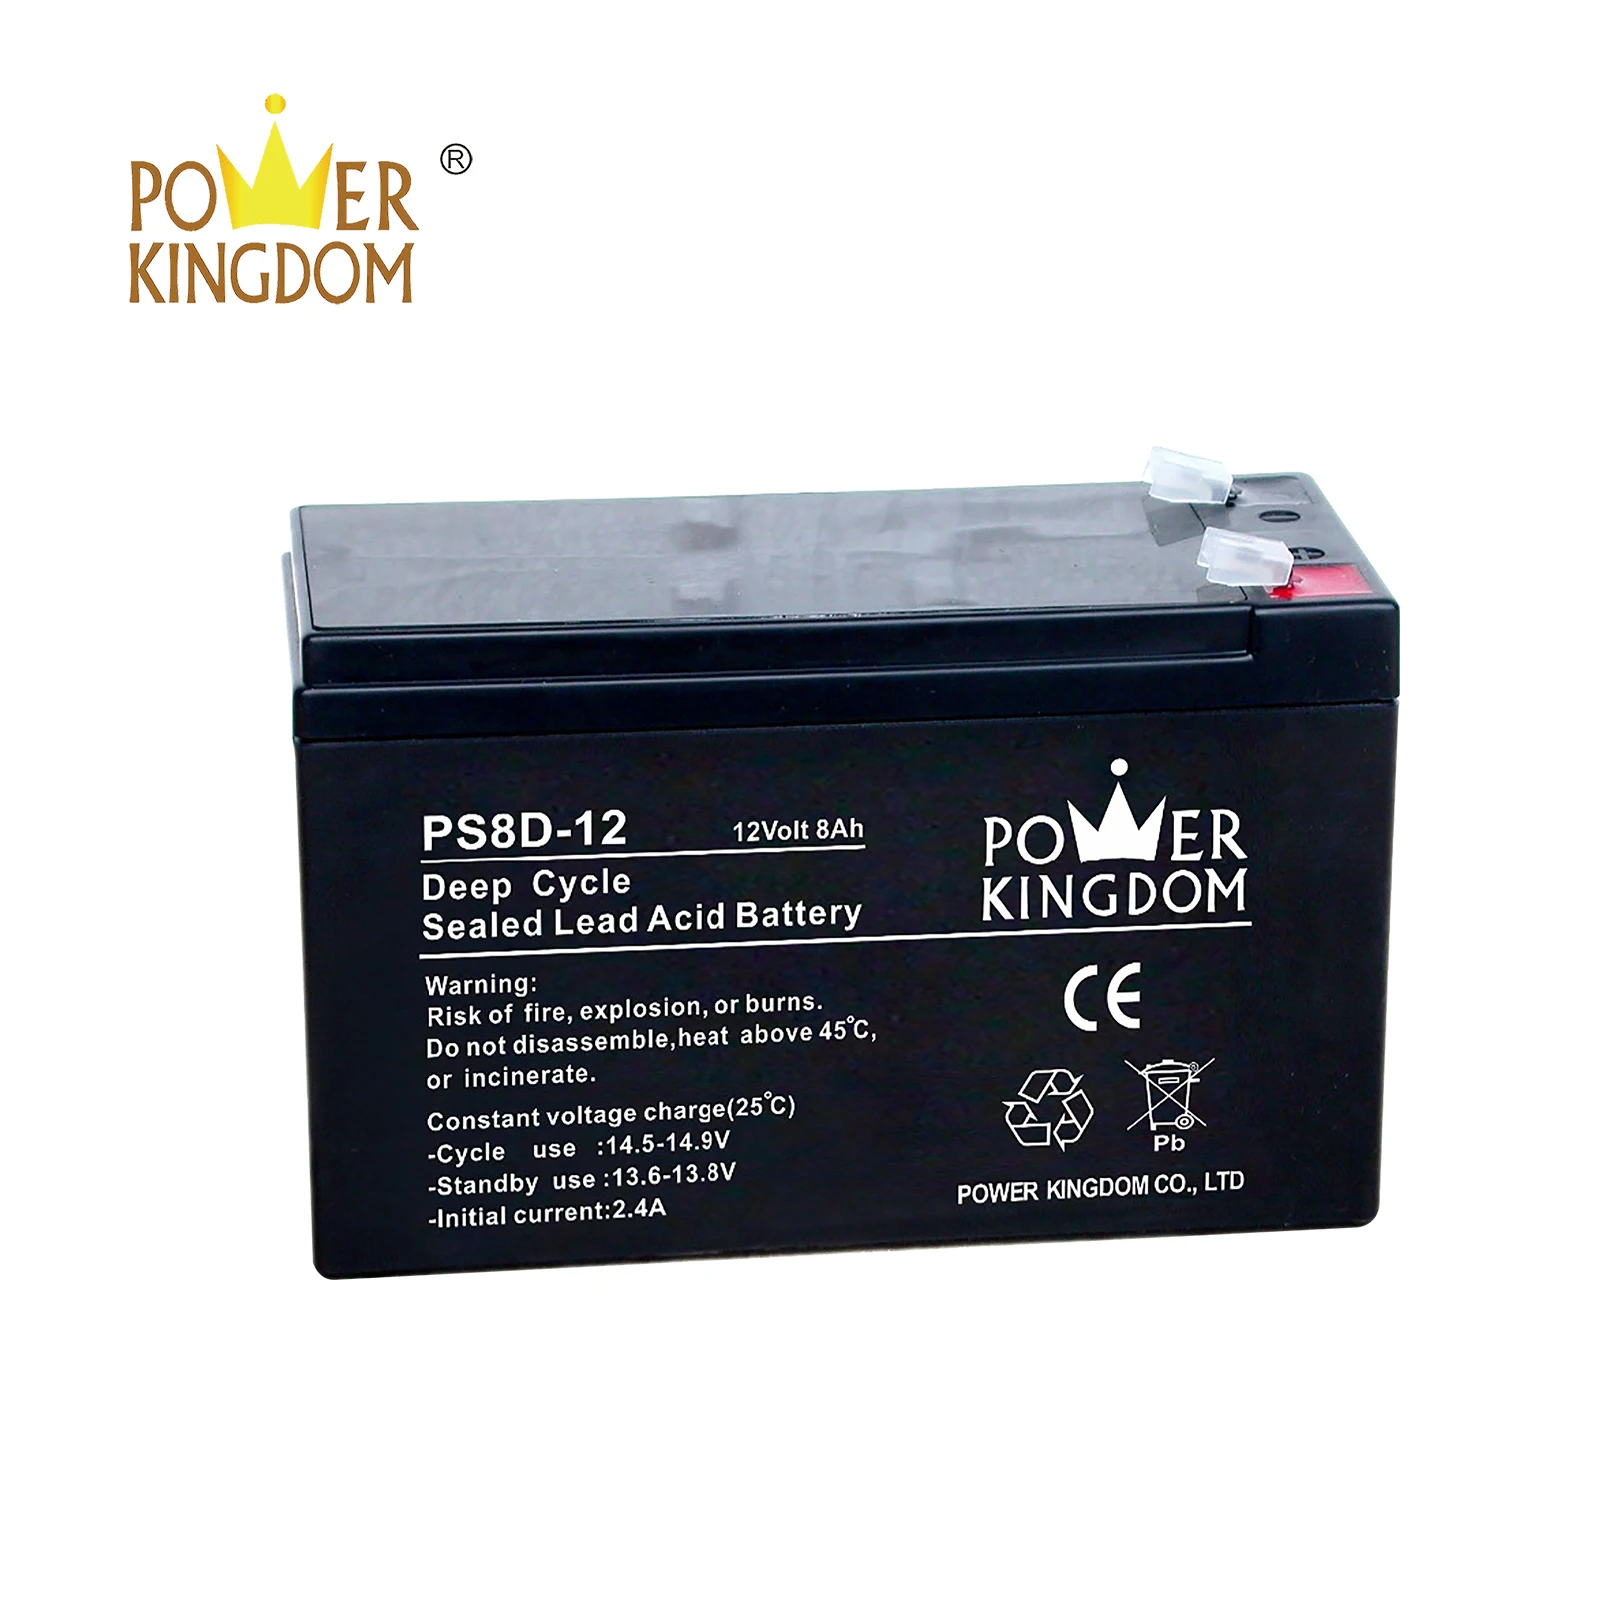 Power Kingdom wet cell deep cycle battery supplier wind power systems-2